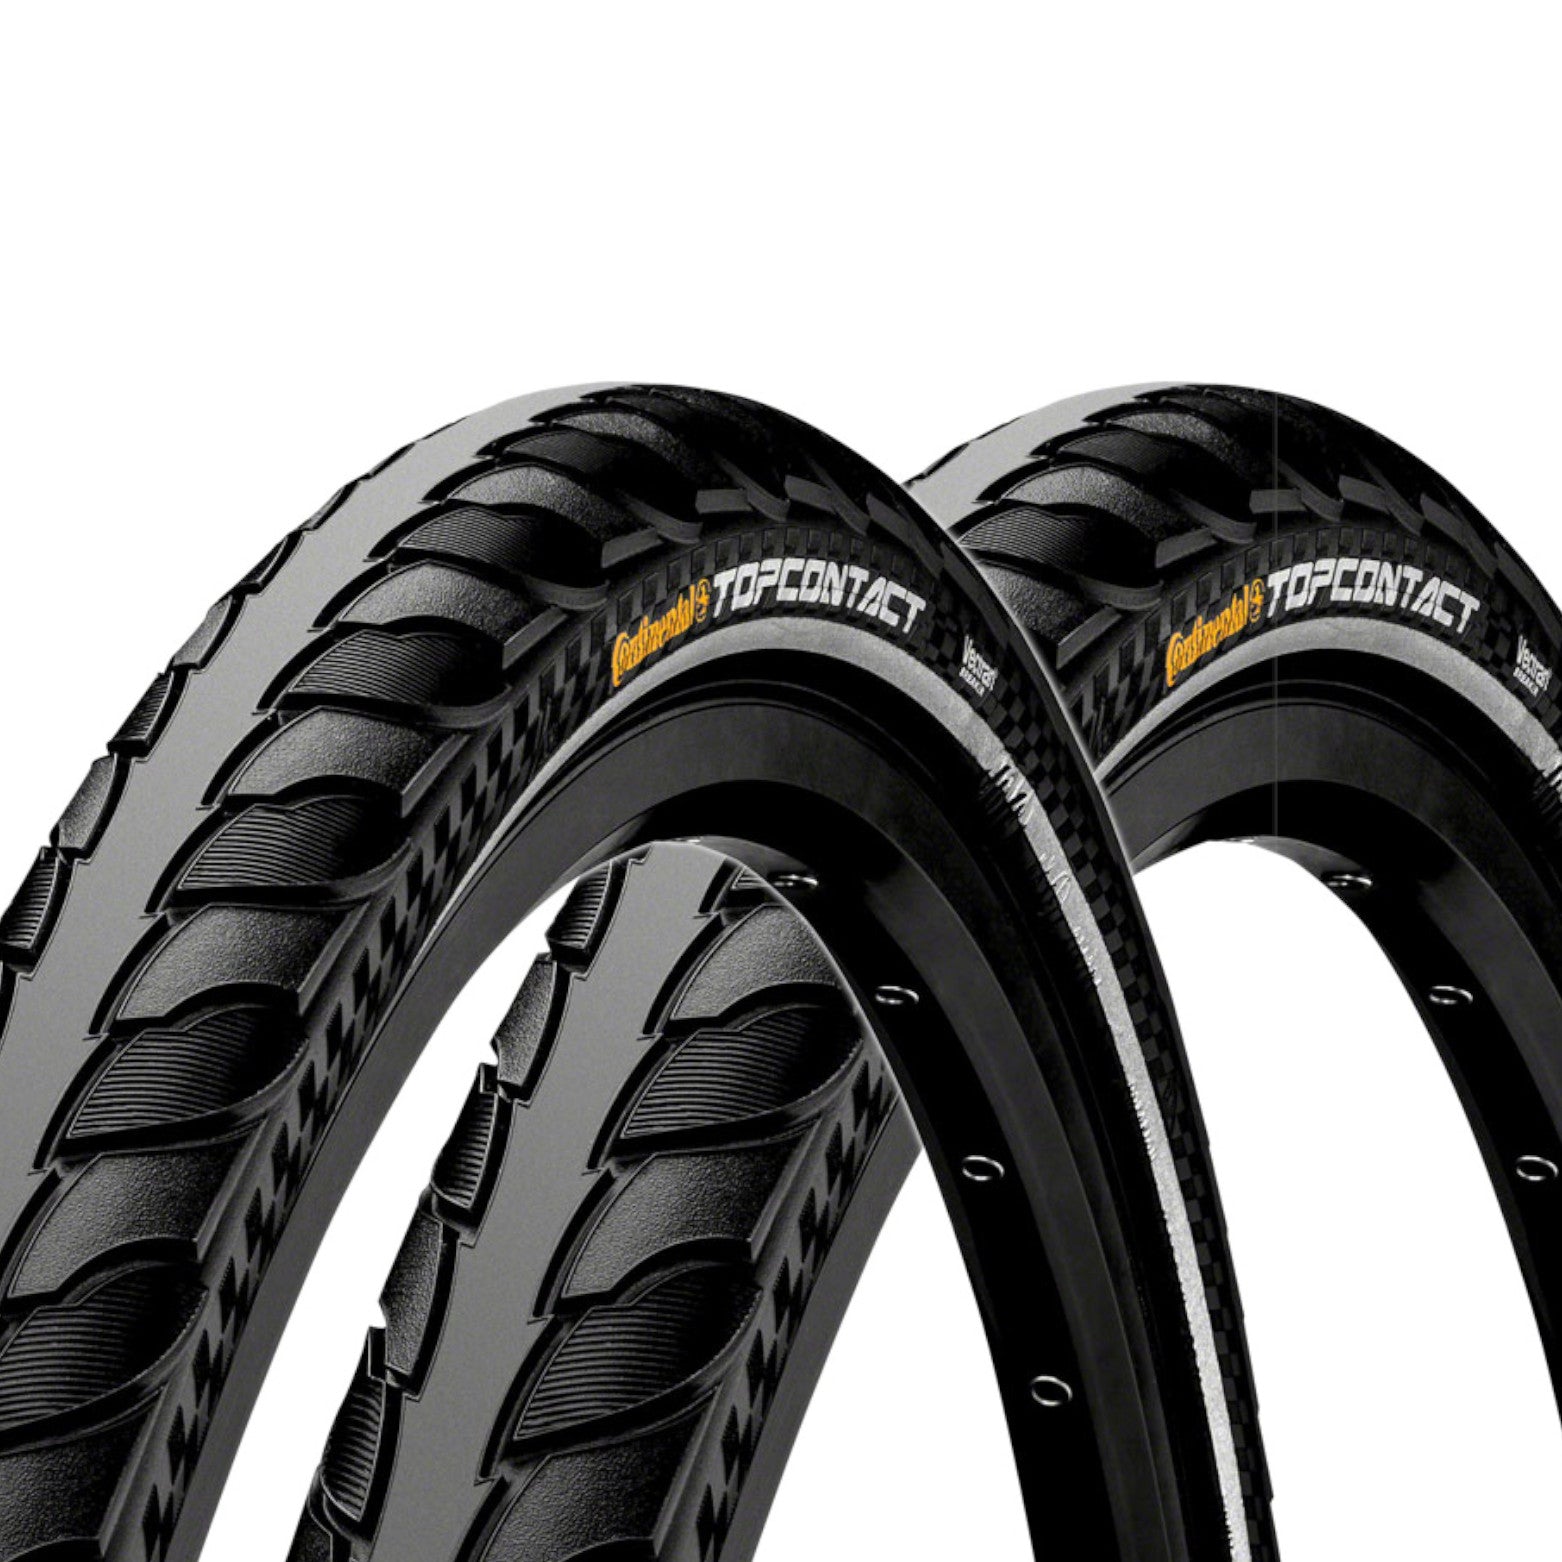 Continental Top Contact II 700C Folding Tire - The Bikesmiths